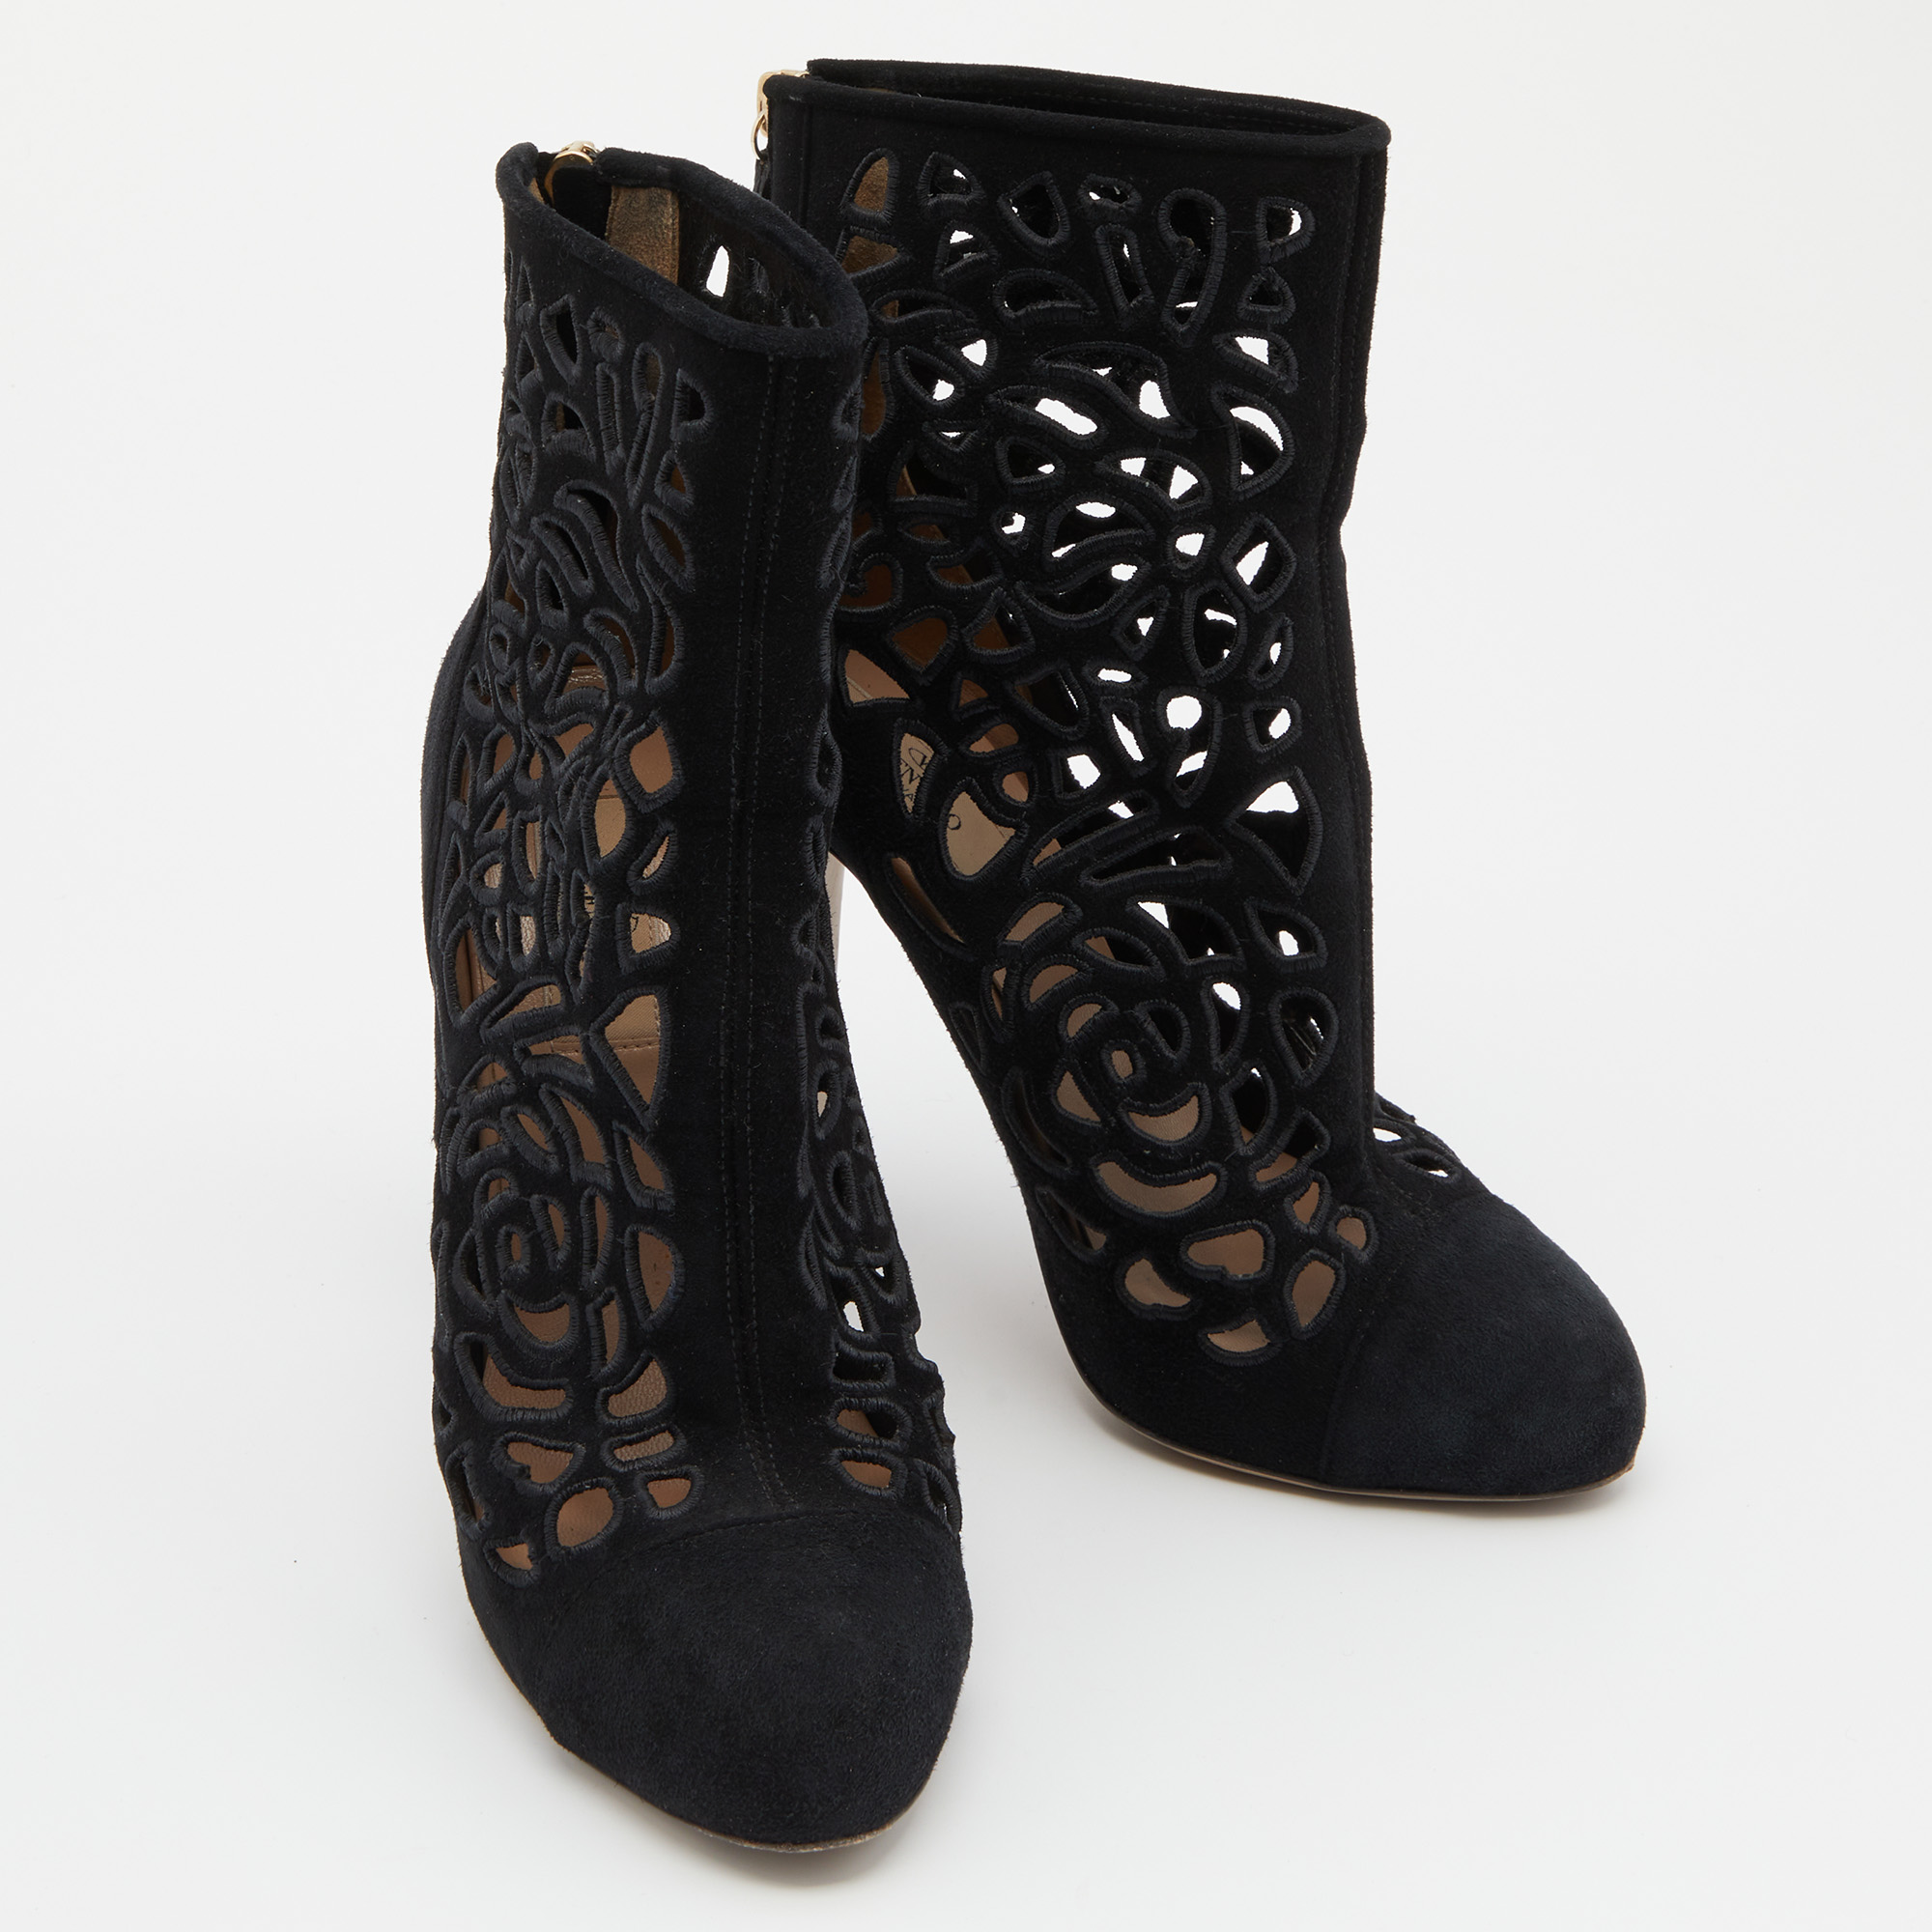 Valentino Black Laser Cut Suede Ankle Length Boots Size 38